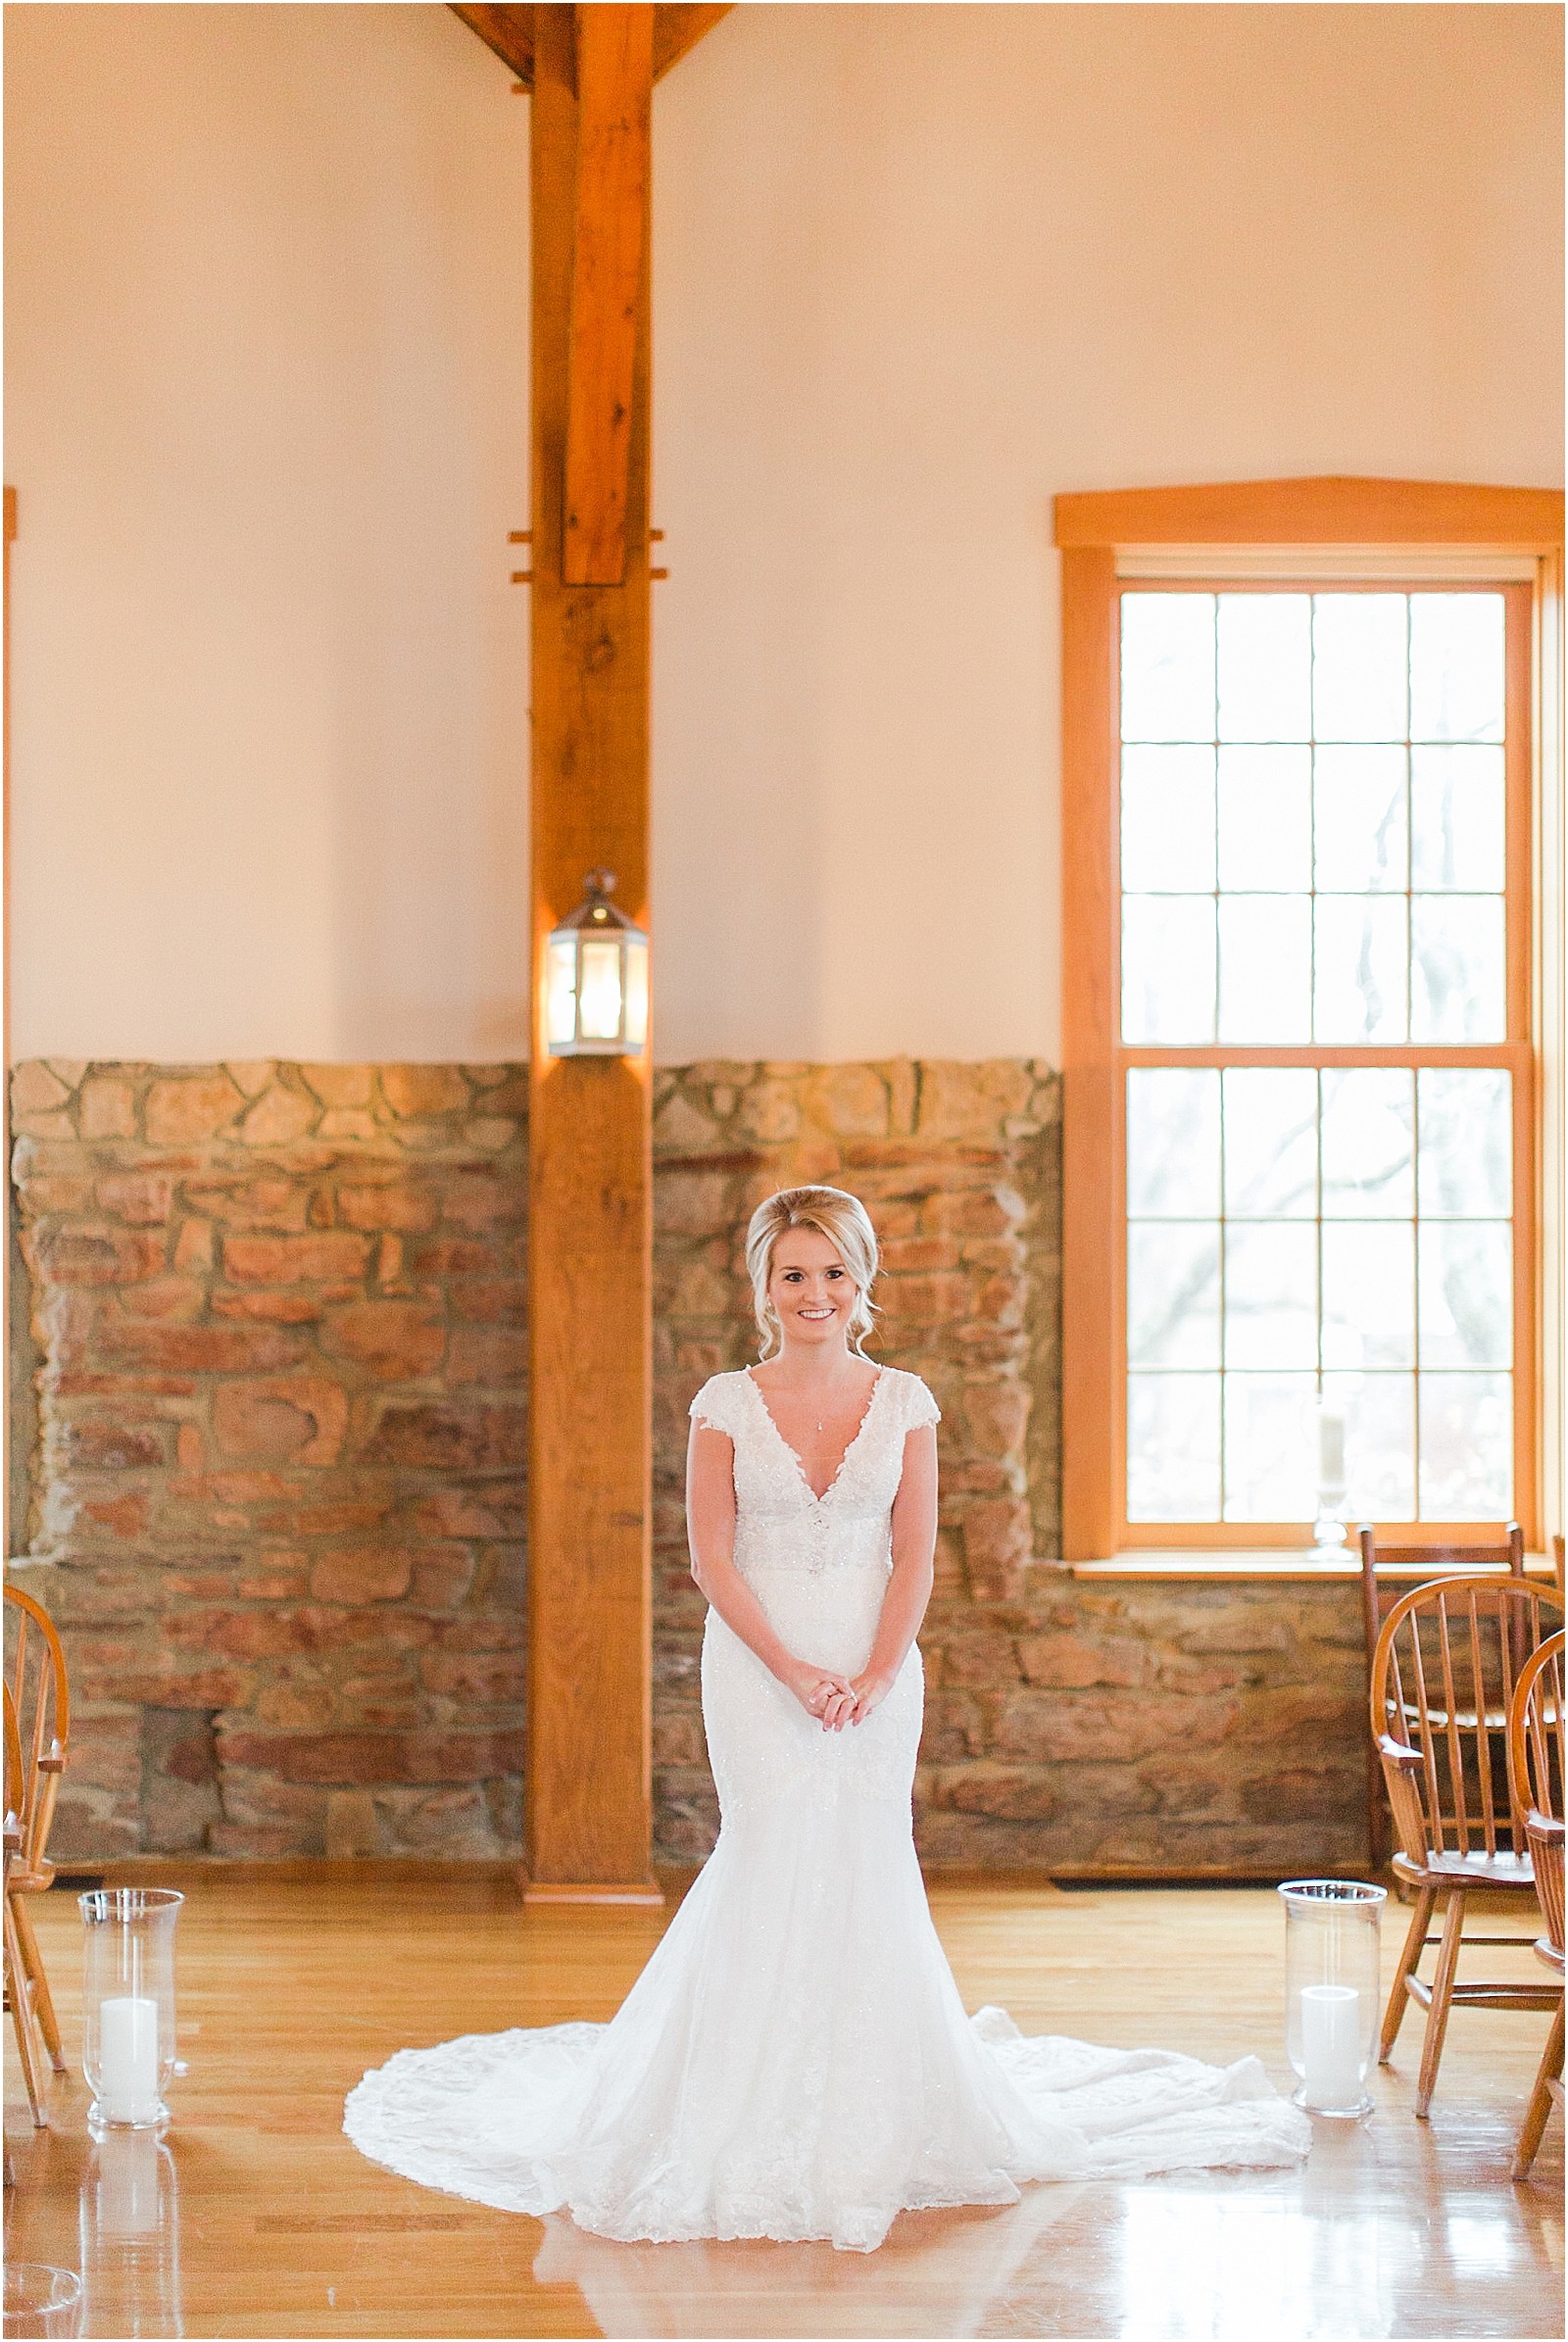 A Classic Winter Wedding in New Harmony | Rachel and Ryan | Bret and Brandie Photography 0044.jpg